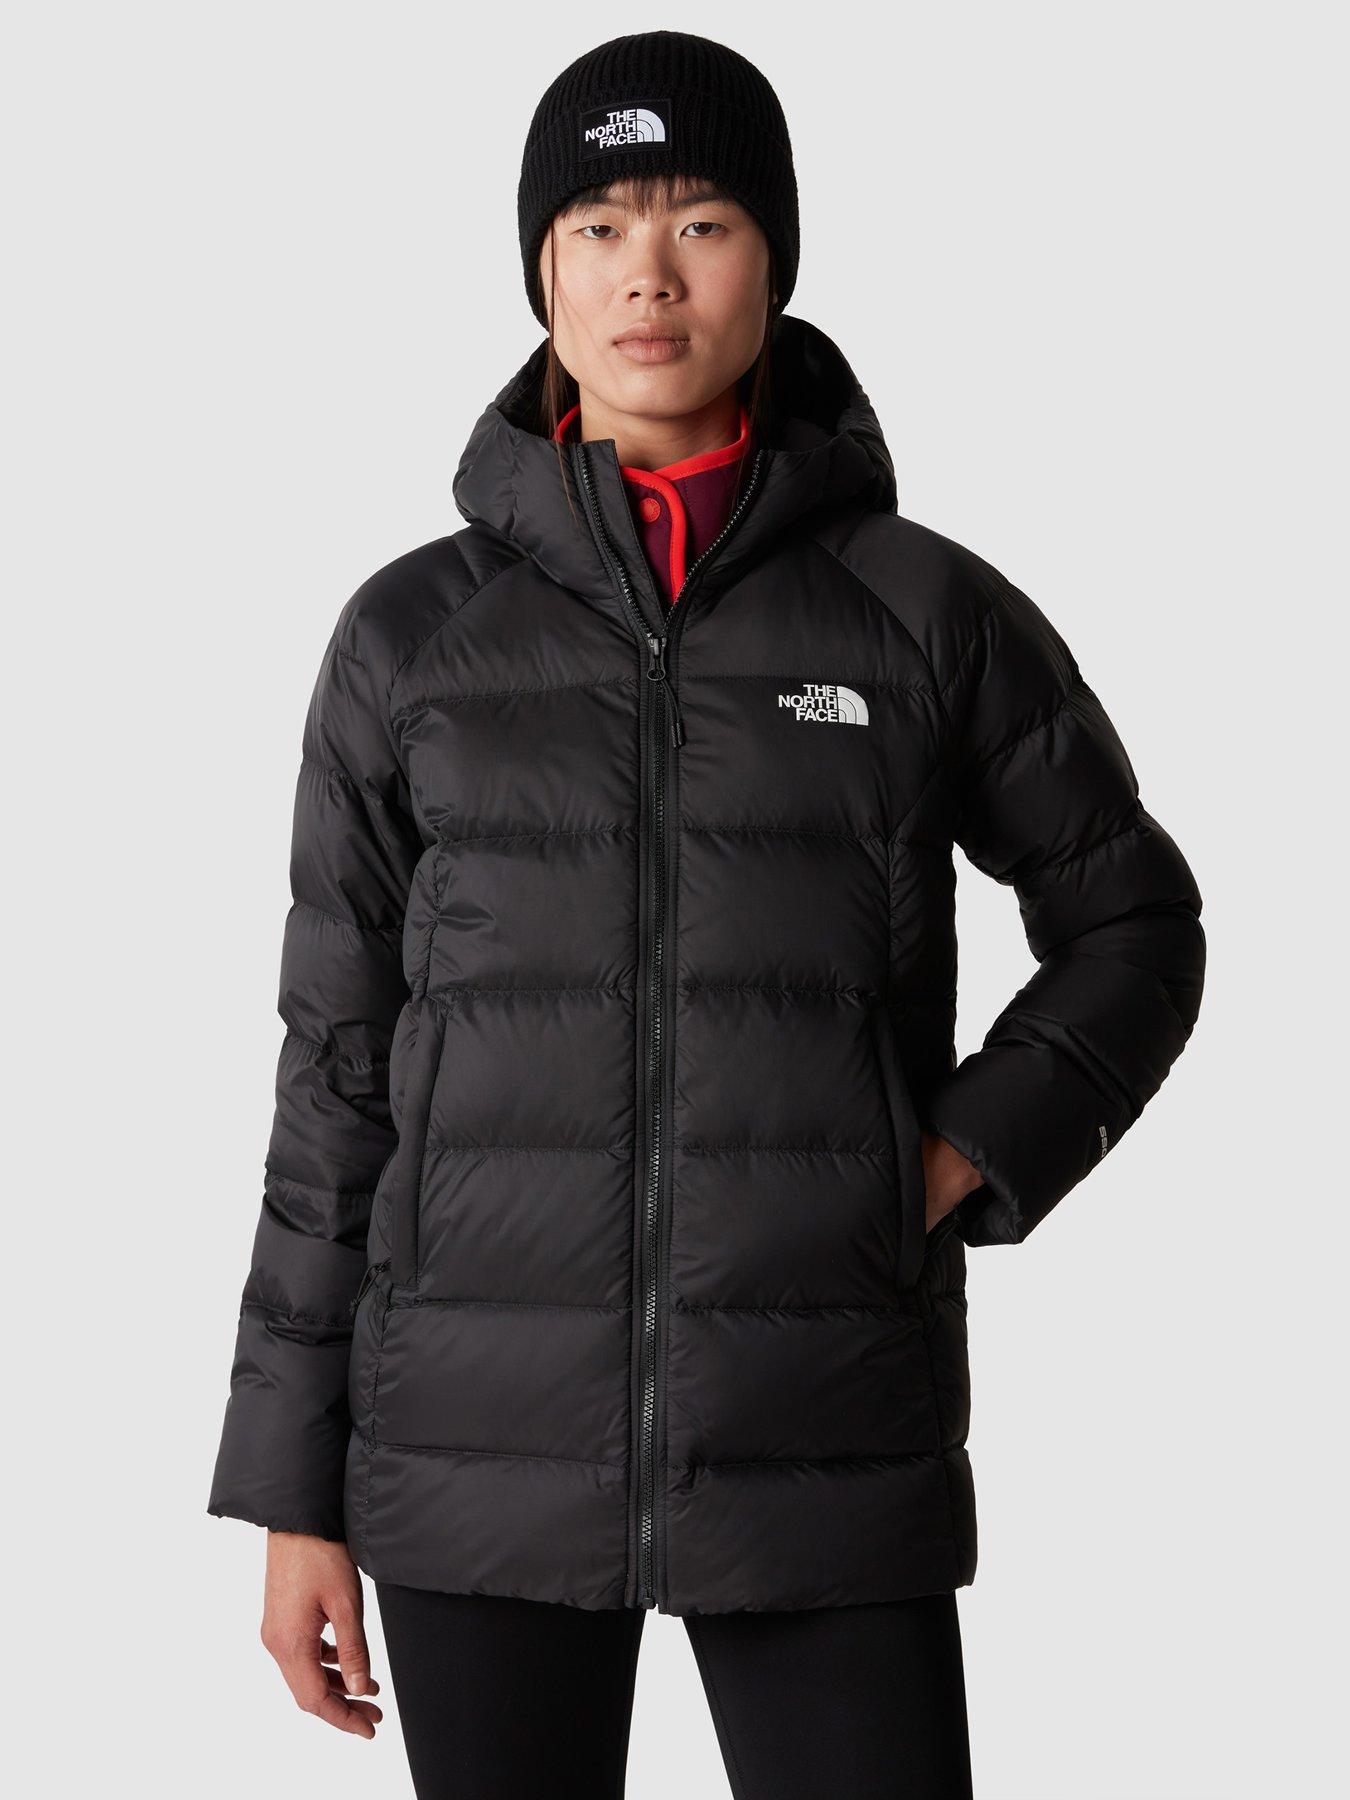 THE NORTH FACE Women's Hyalite Down Parka - Black, Black, Size S, Women